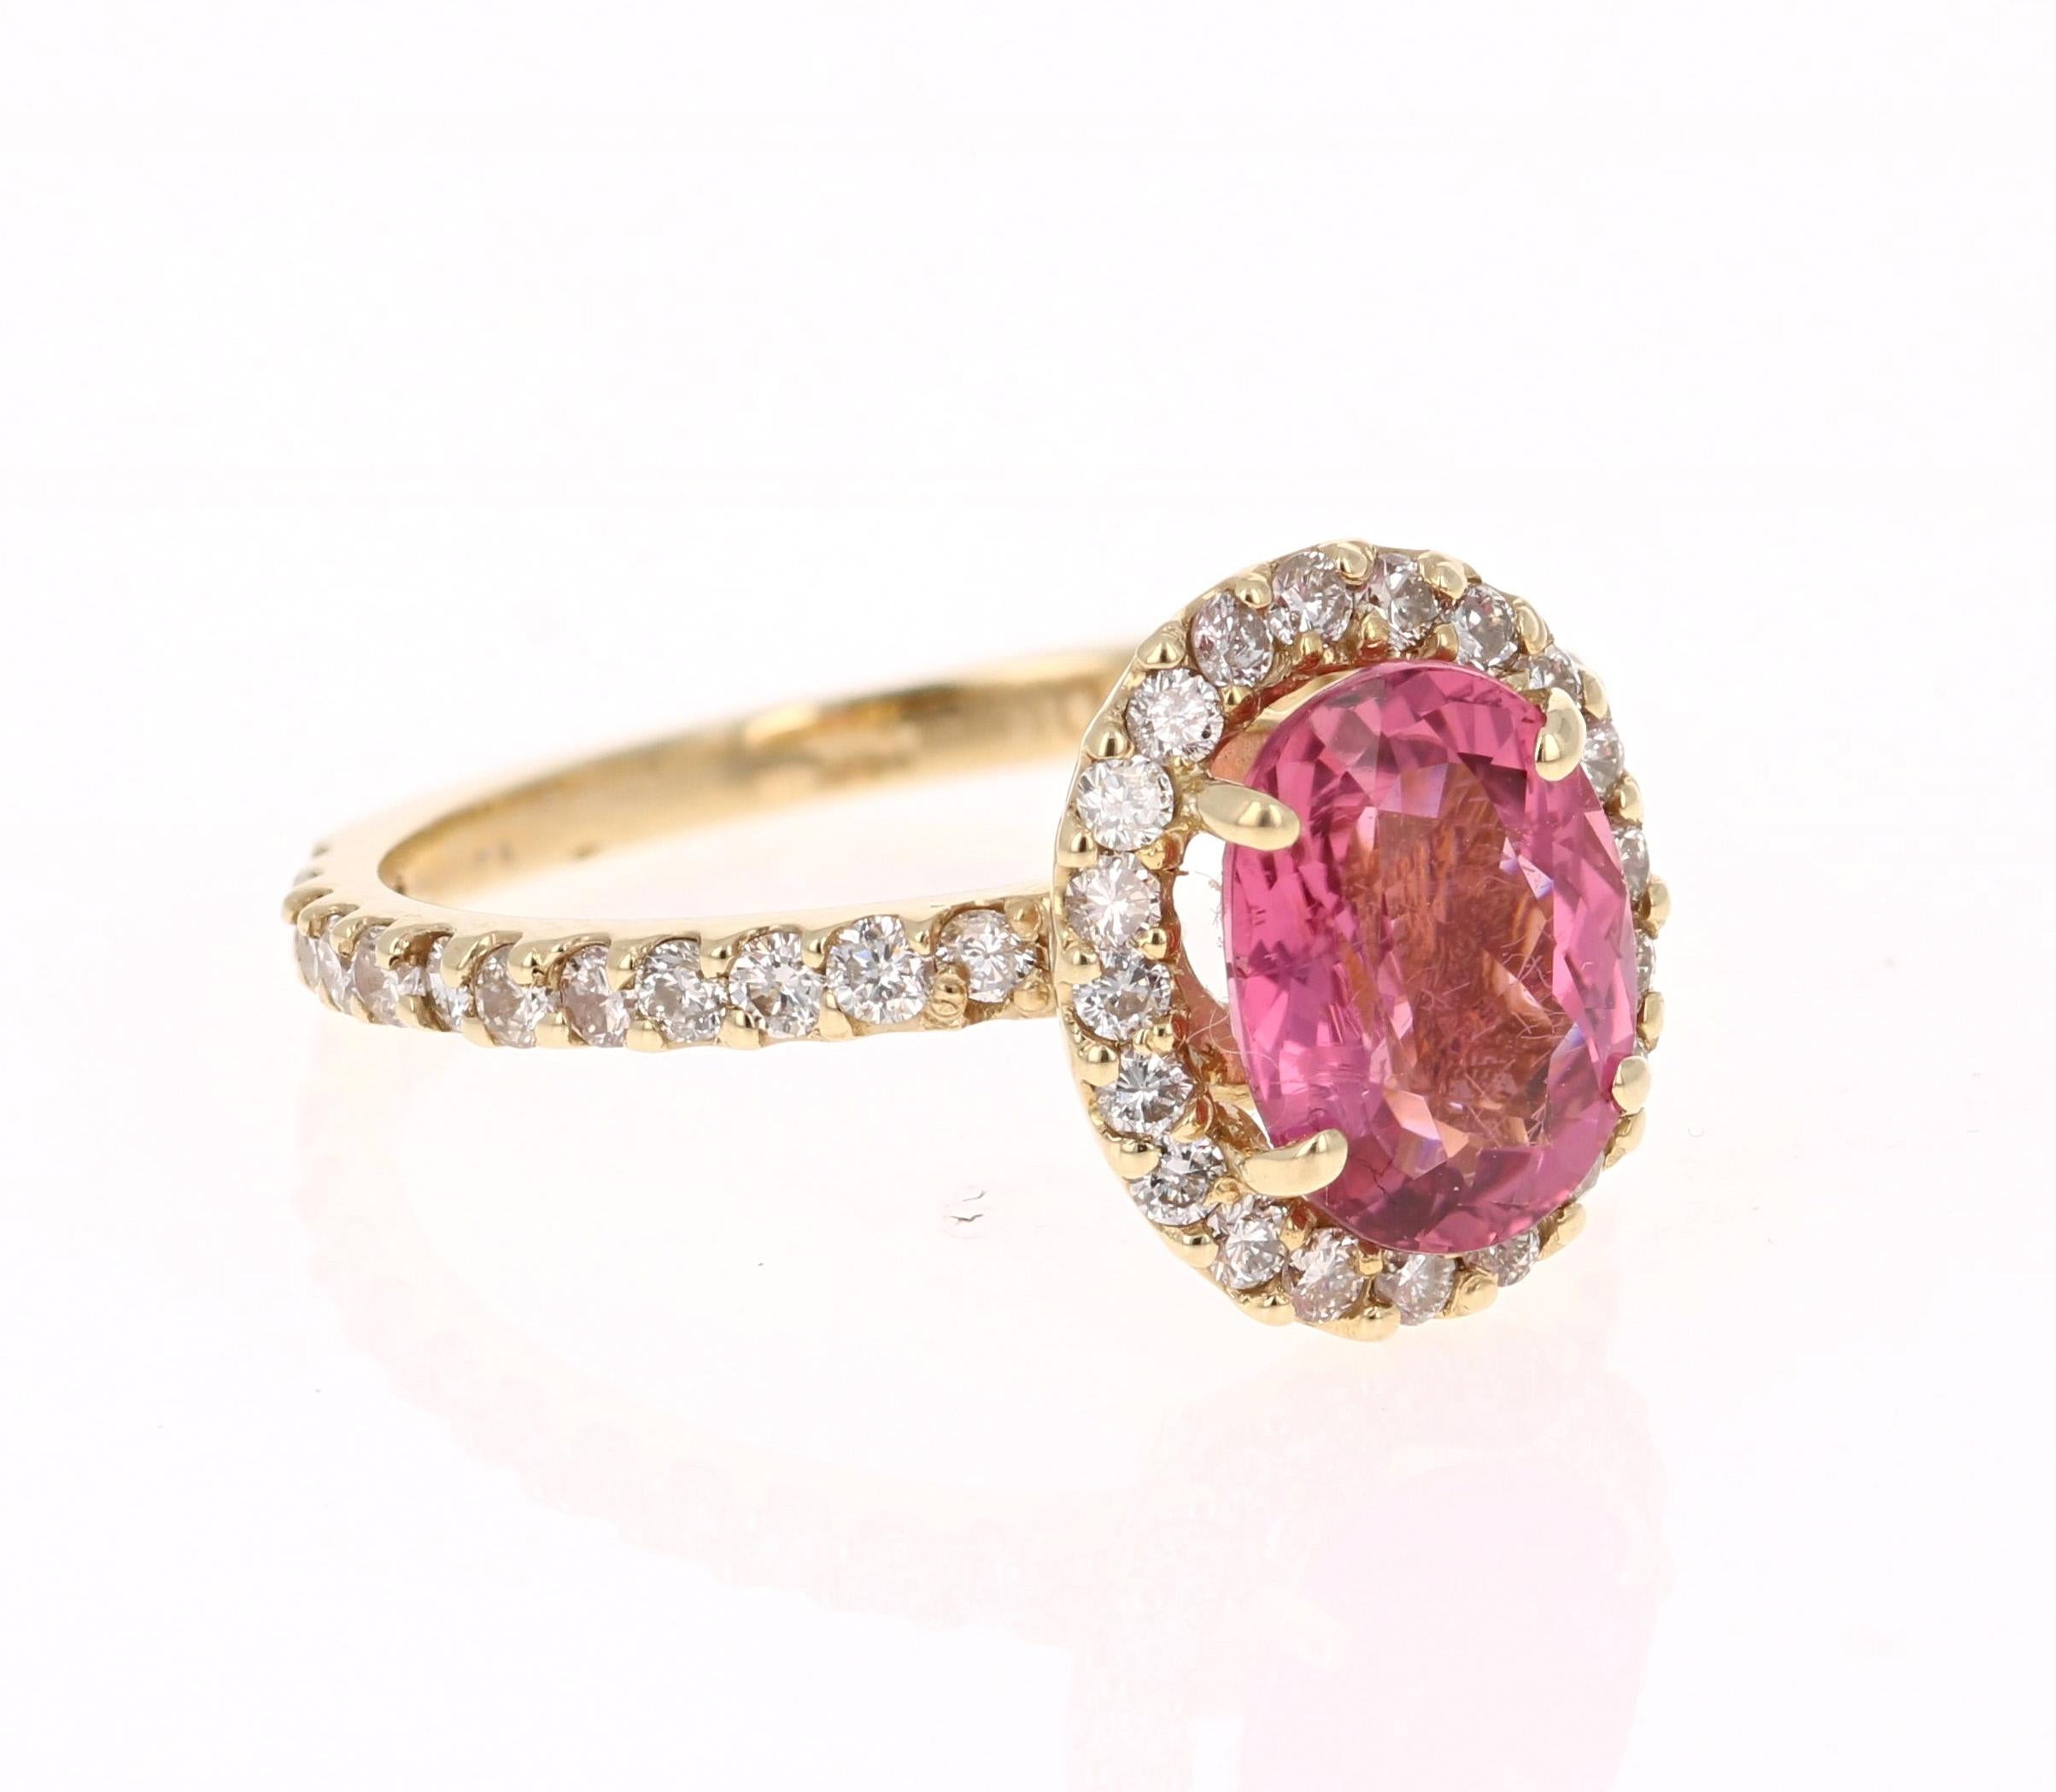 This ring has a gorgeous Oval Cut Pink Tourmaline that weighs 1.93 Carats. Floating around the tourmaline is a simple halo of 44 Round Cut Diamonds that weigh 0.73 Carats. The total carat weight of the ring is 2.66 Carats. 

The tourmaline is 9 mm x